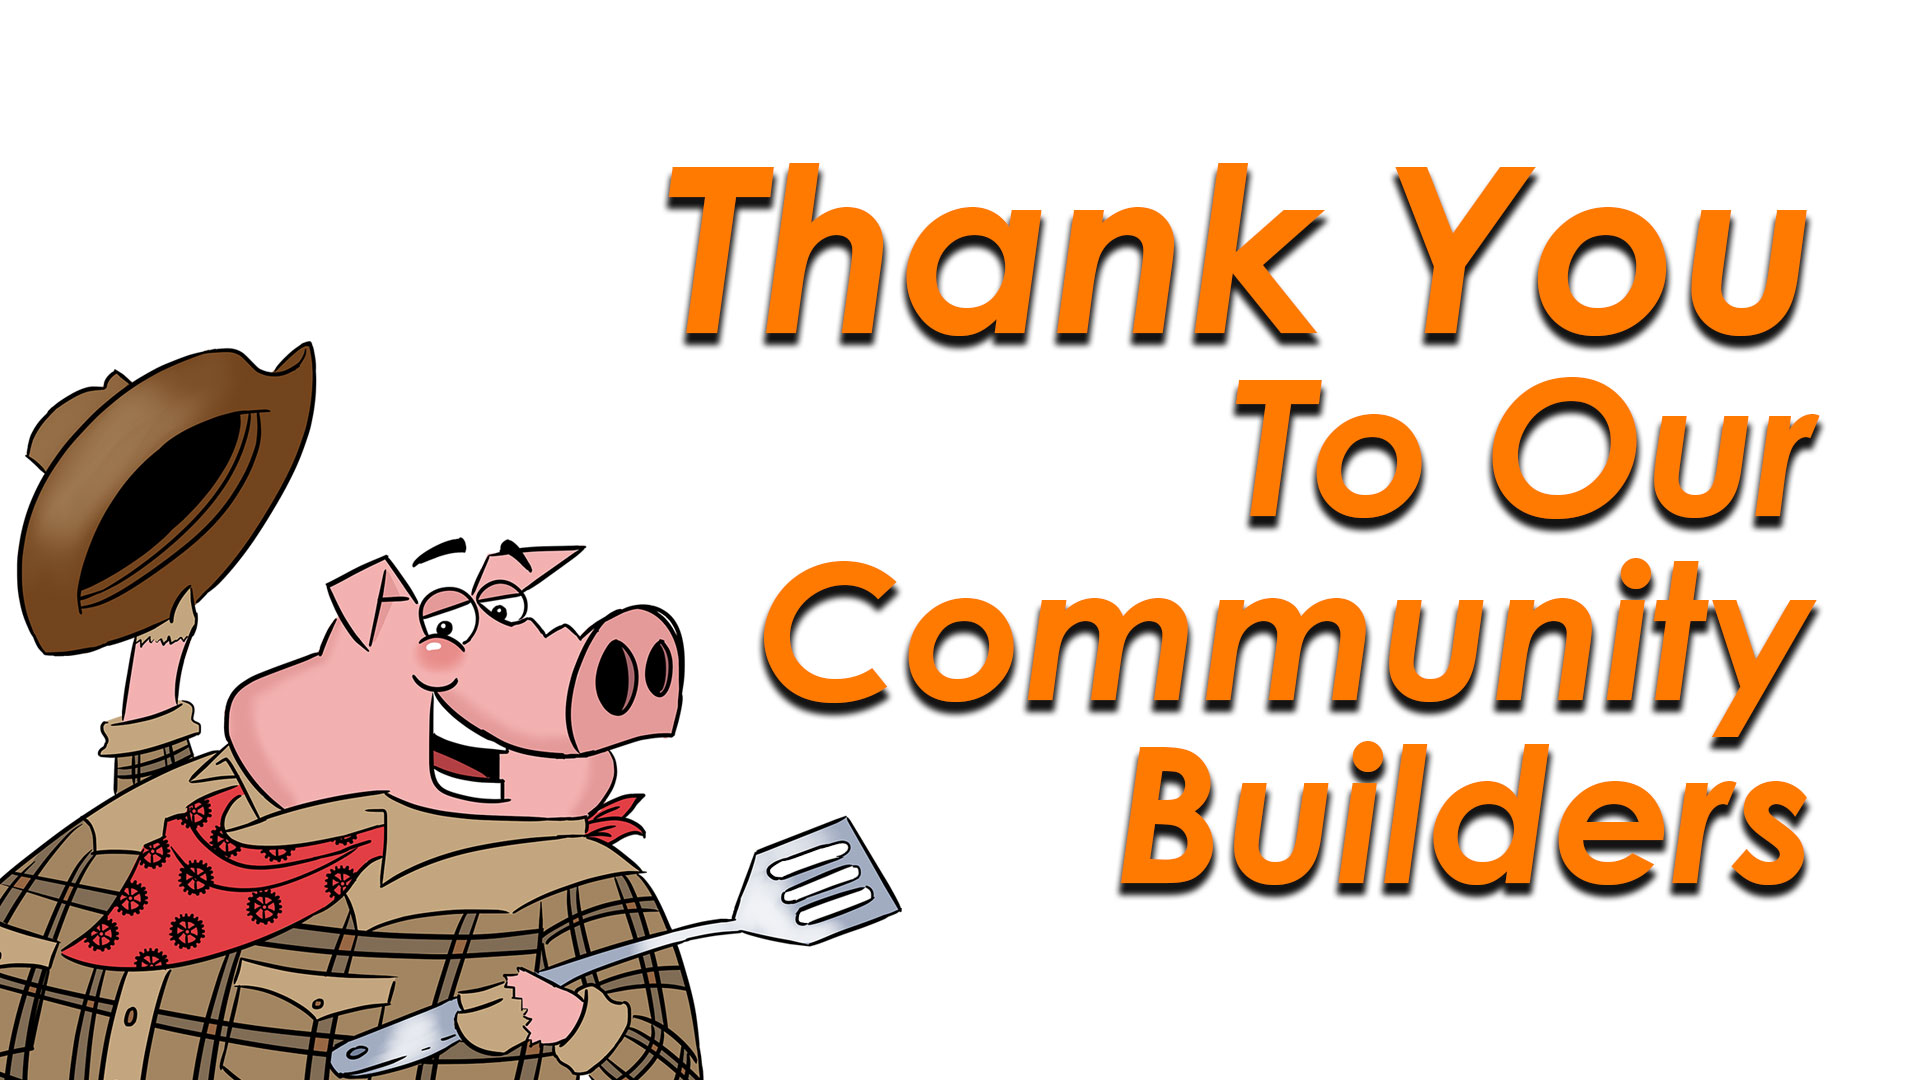 Thank you to our Community Builders